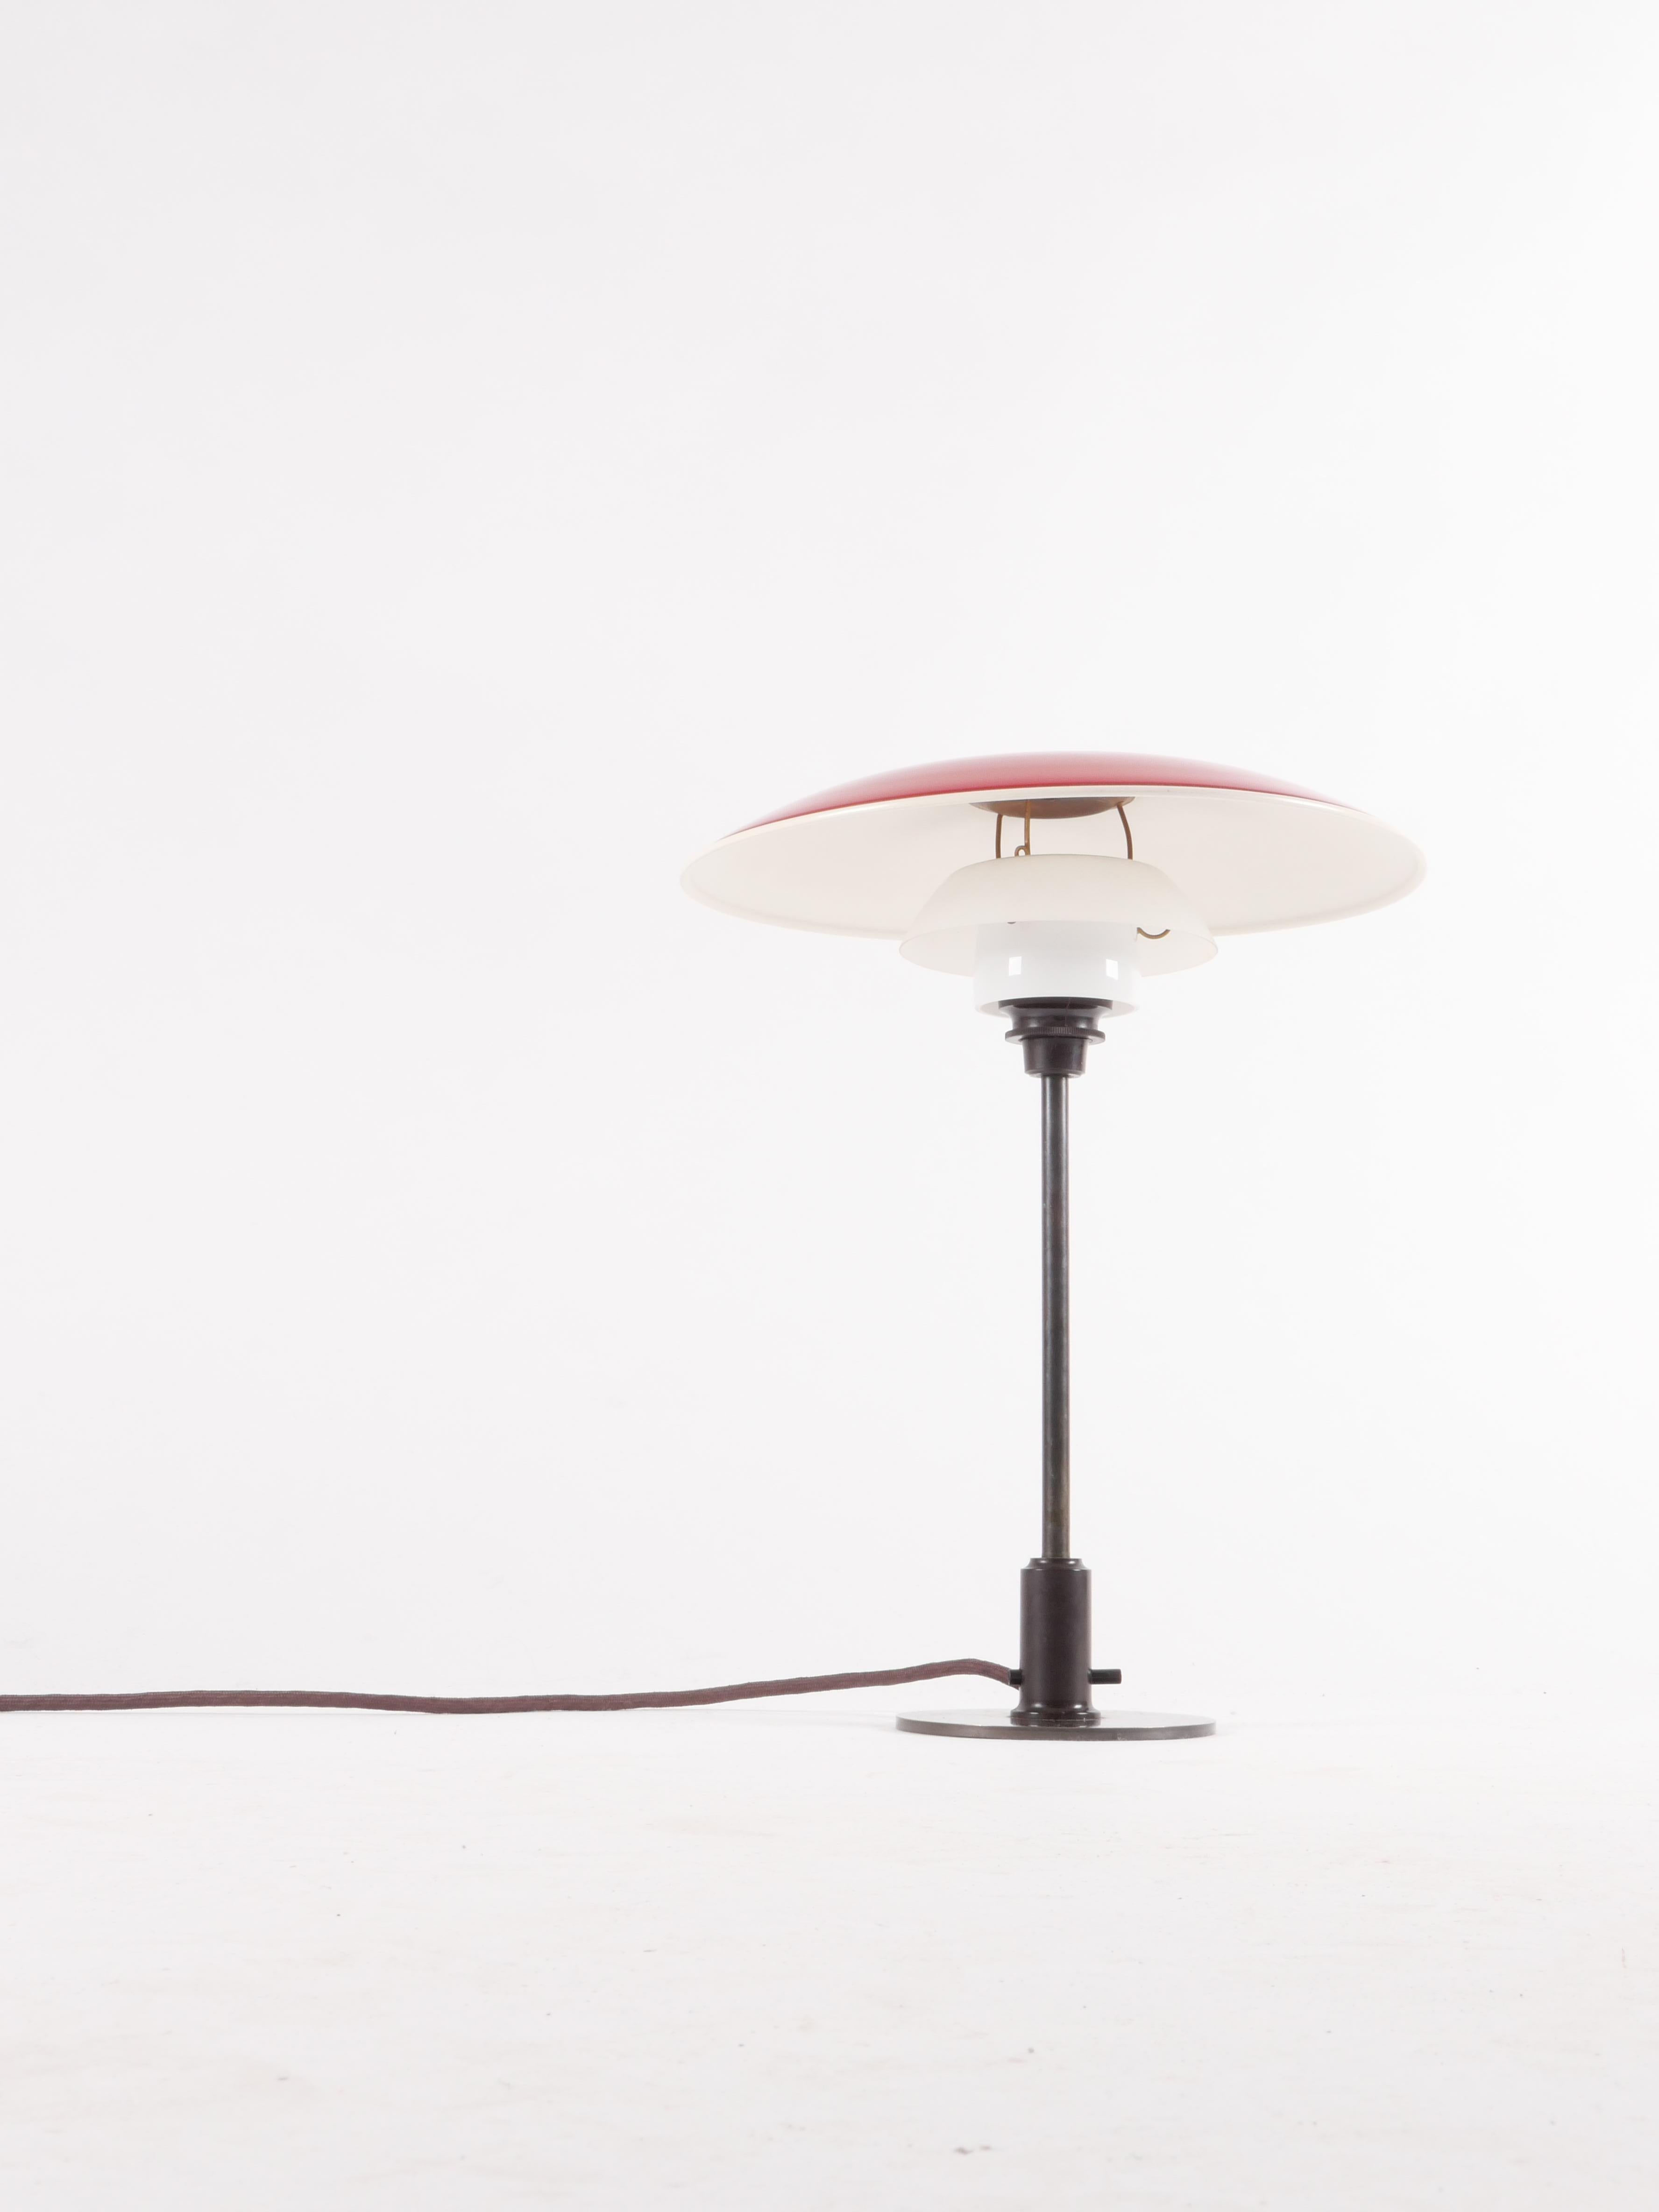 Iconic design by Poul Henningsen in wonderfully patinated brass with original opaline glass diffusers and professionally re-lacquered copper top shade. Newly rewired for European outlets; easily adaptable to US. Rare example lamp in beautiful